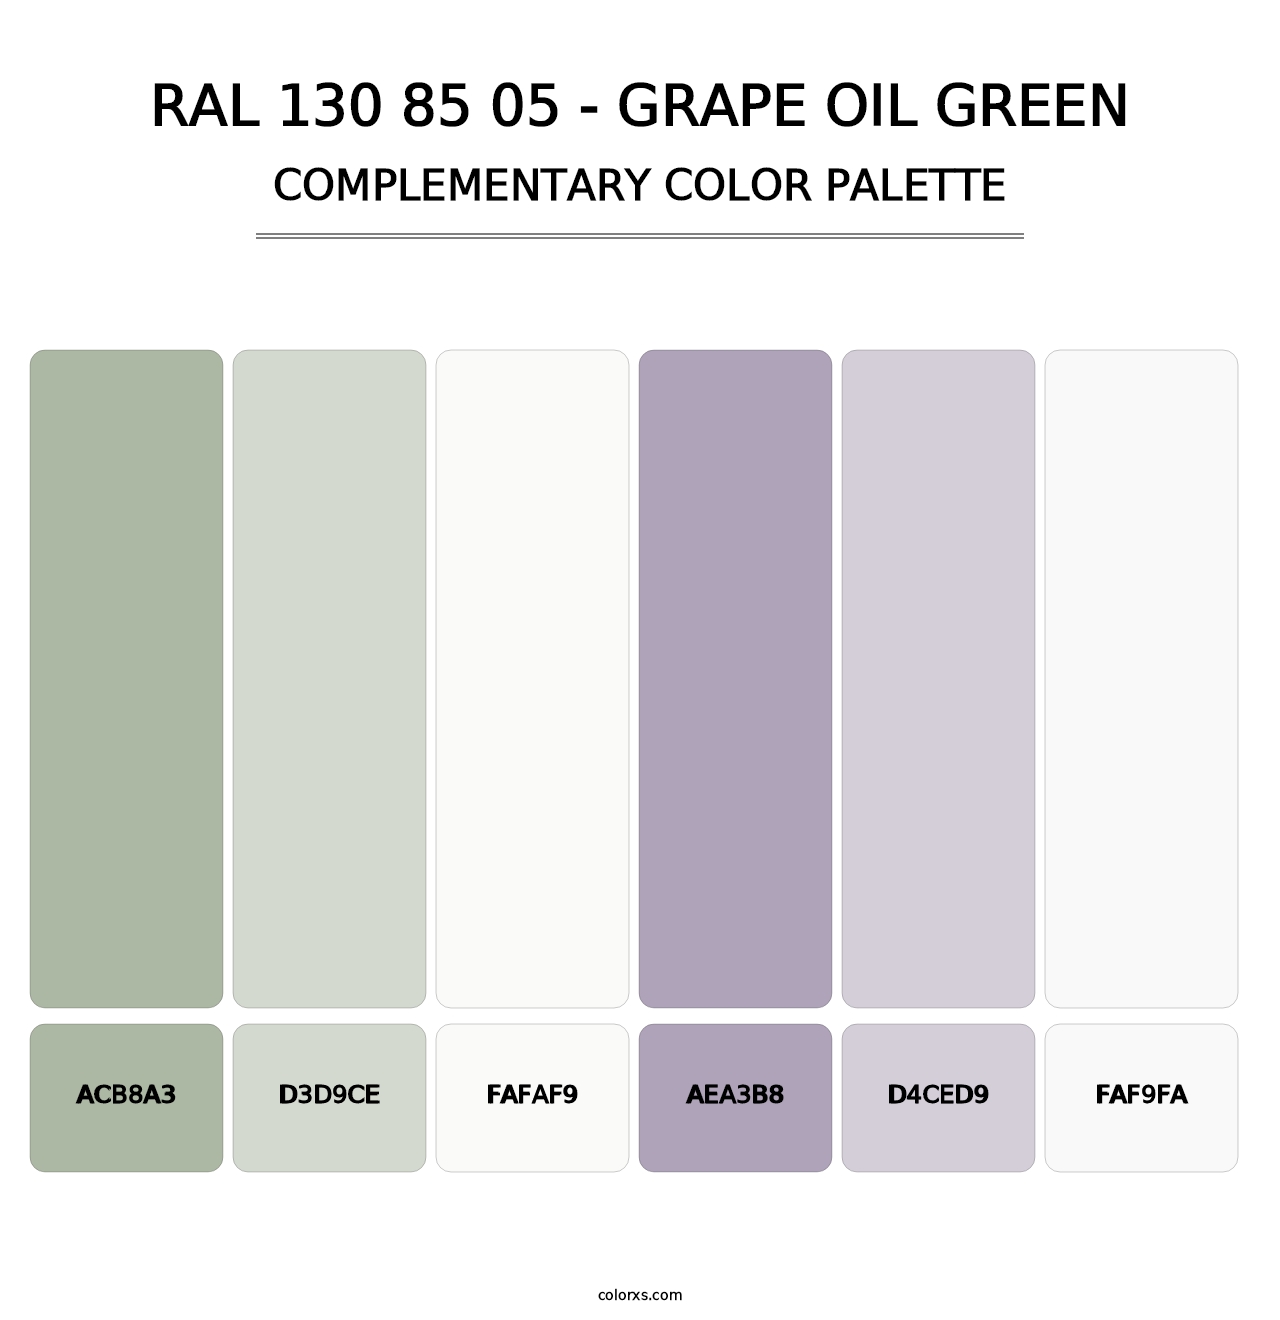 RAL 130 85 05 - Grape Oil Green - Complementary Color Palette